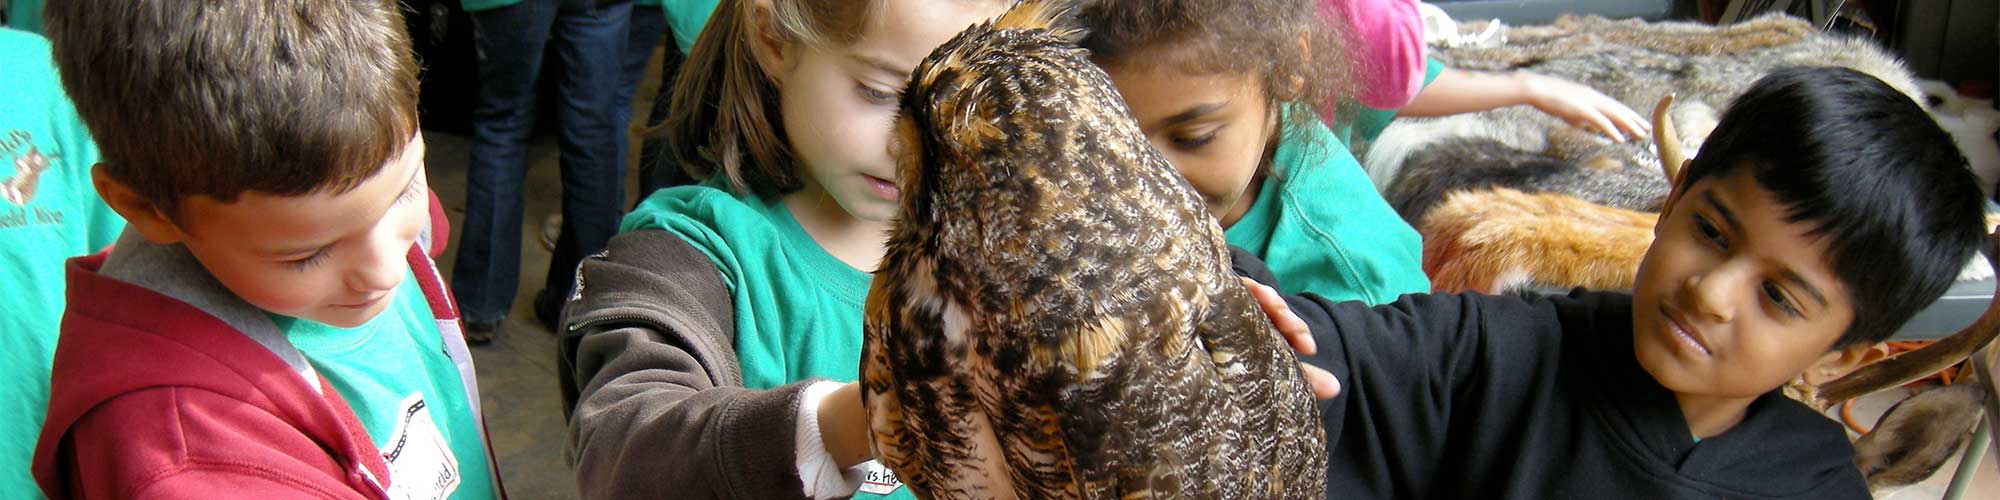 Children learn about Wildlife at Mountain Island Educational State Forest